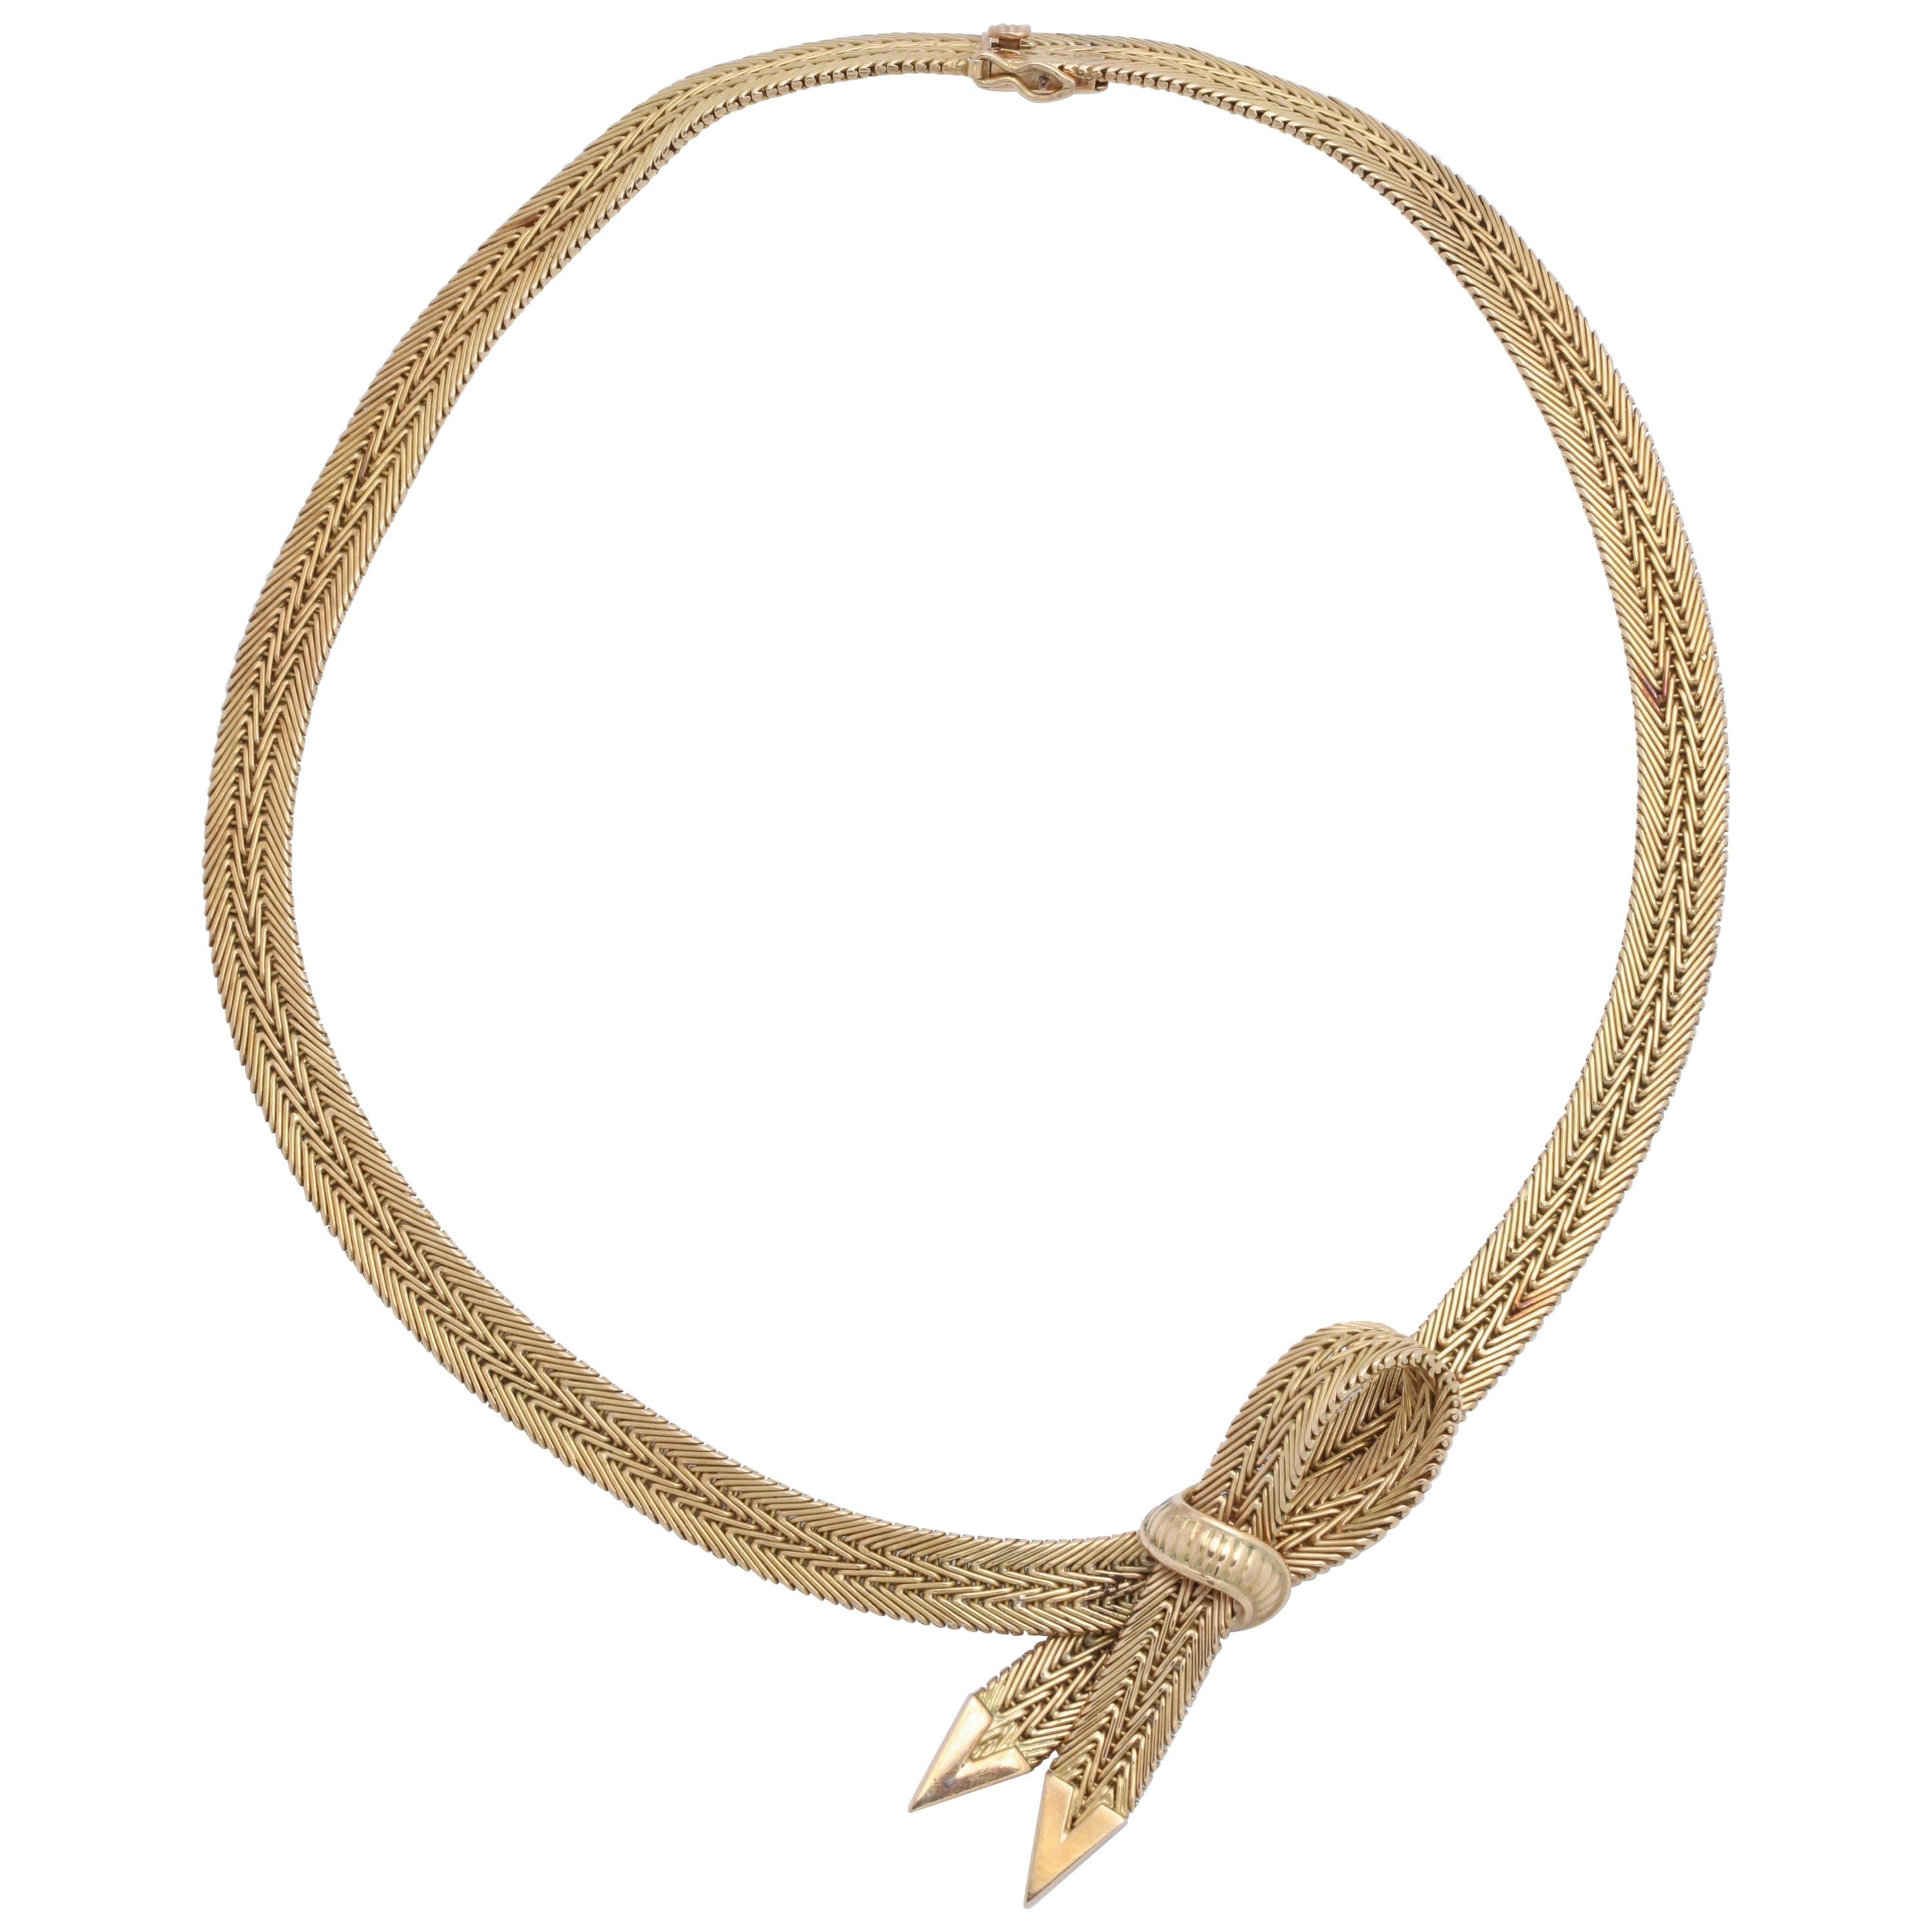 Woven Herringbone Necklace with Centre Bow